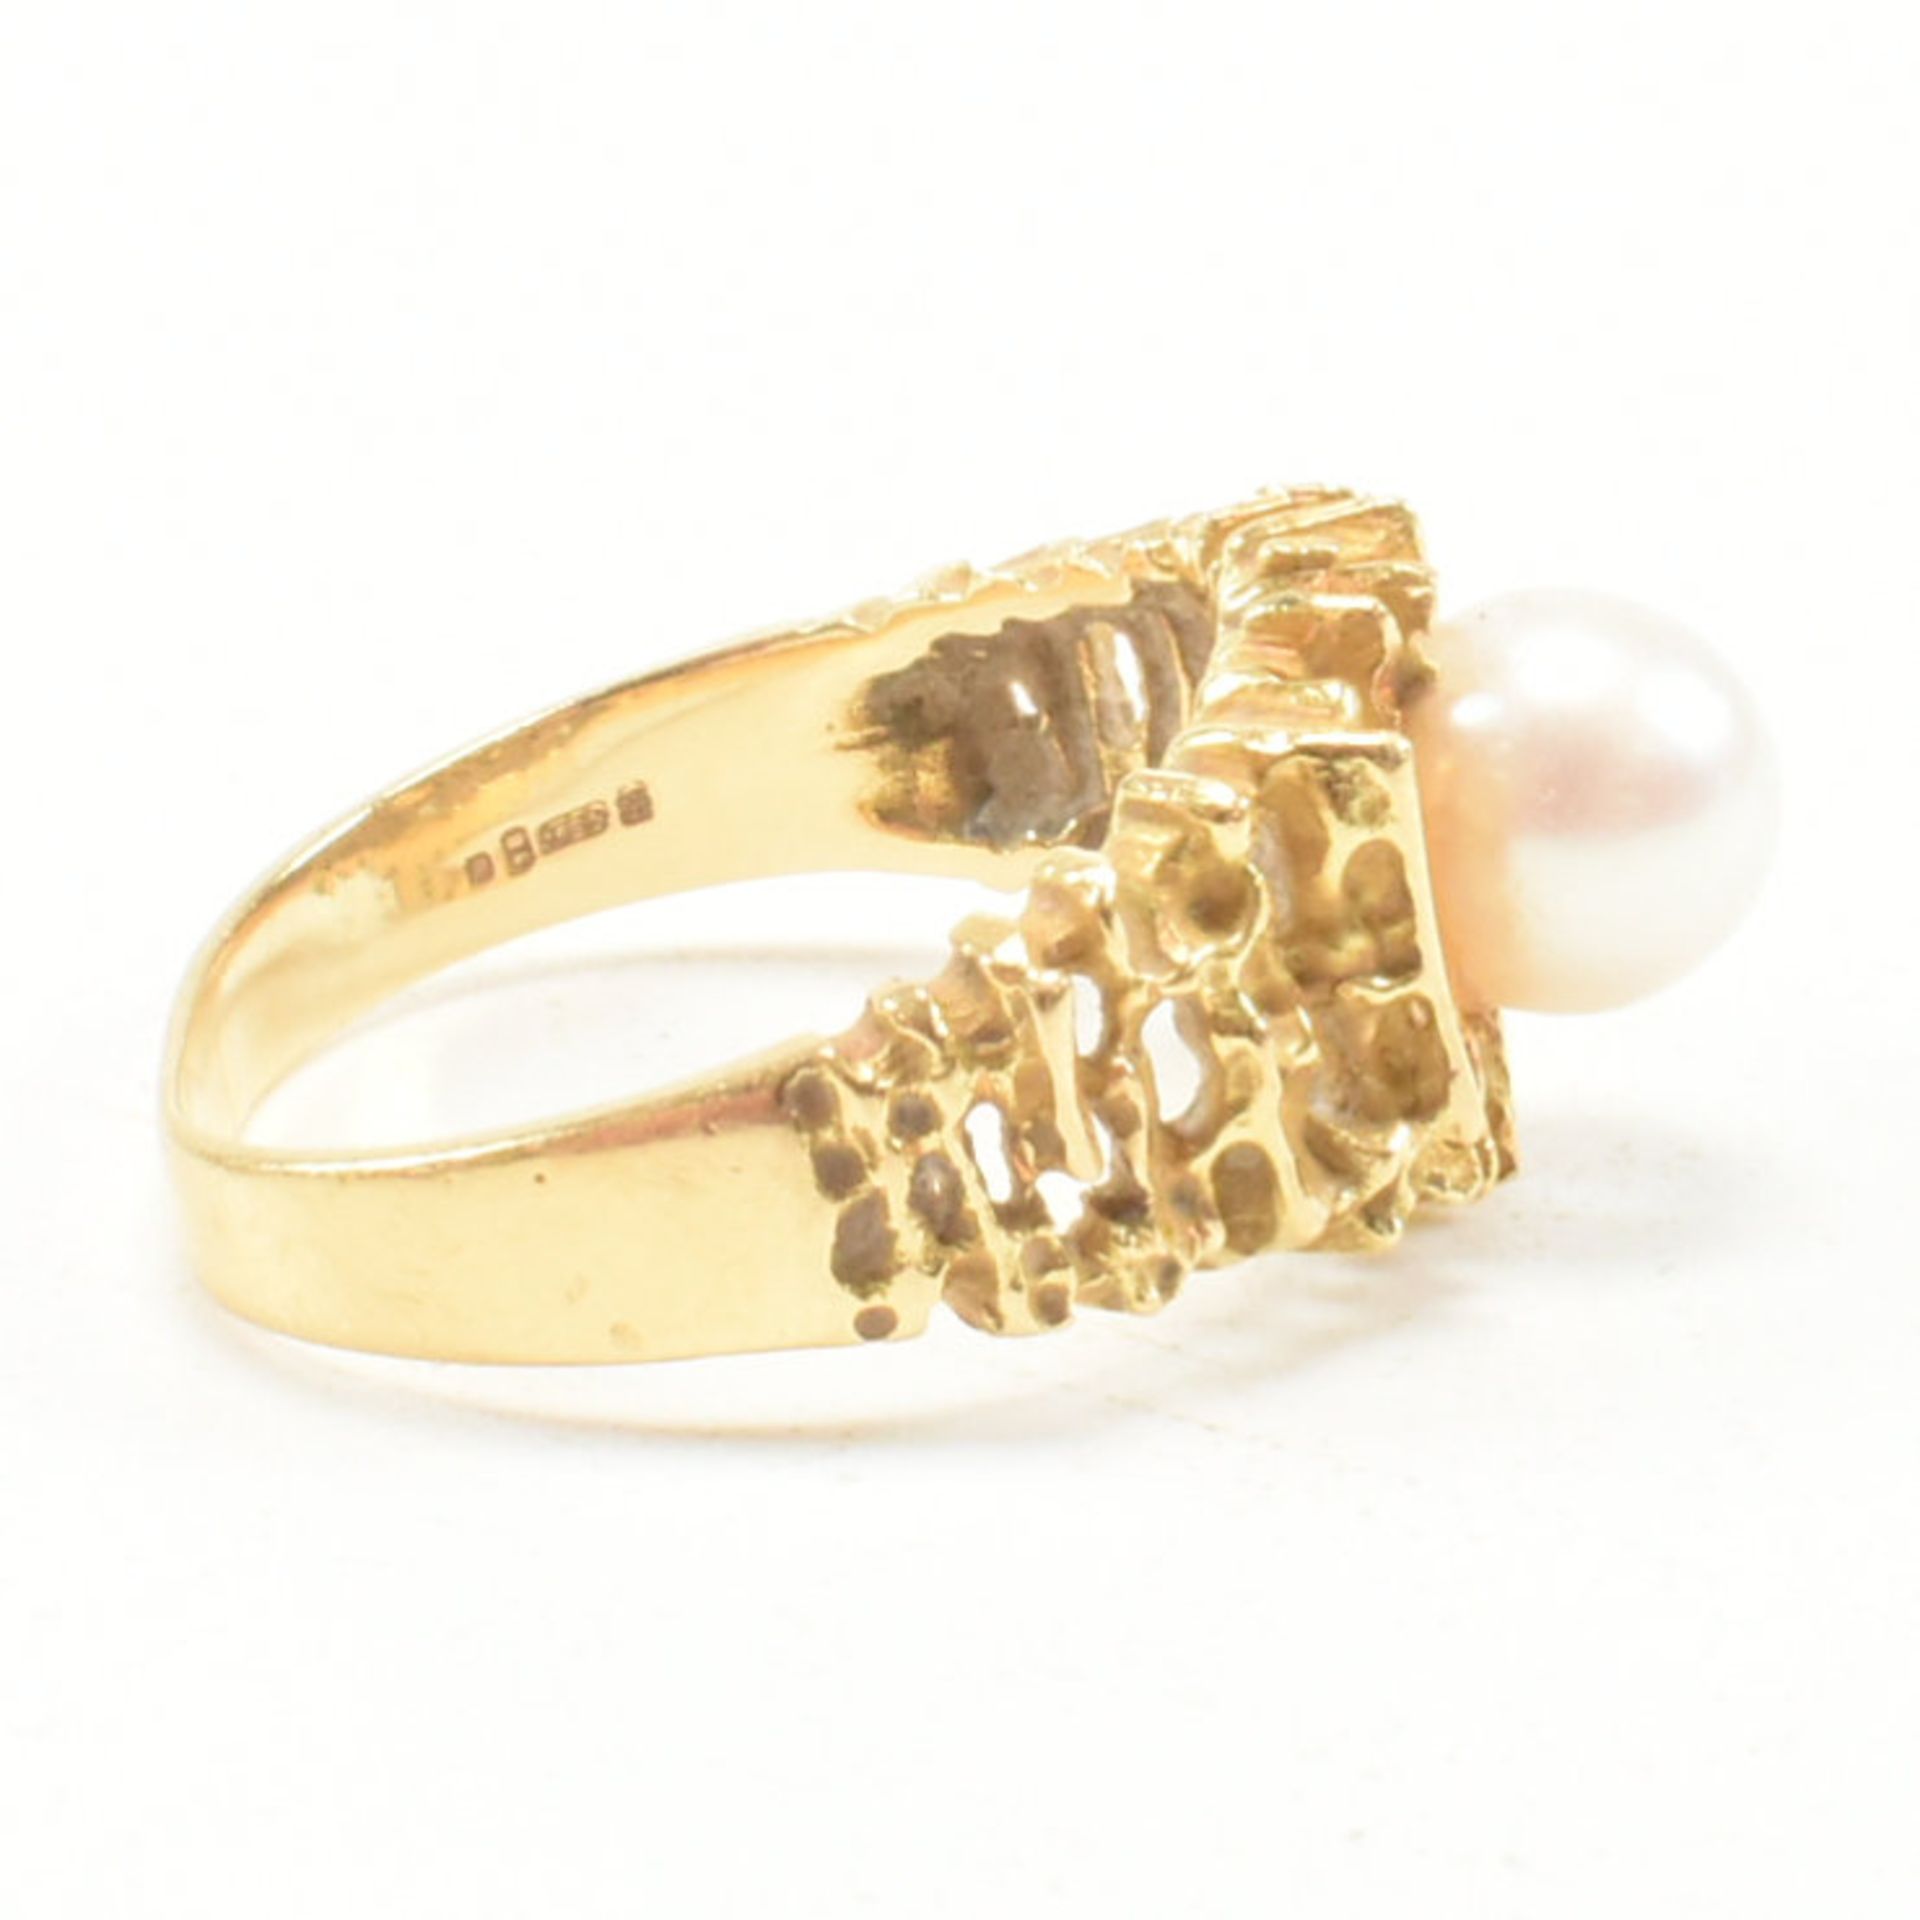 VINTAGE 18CT GOLD & PEARL DRESS RING - Image 5 of 7